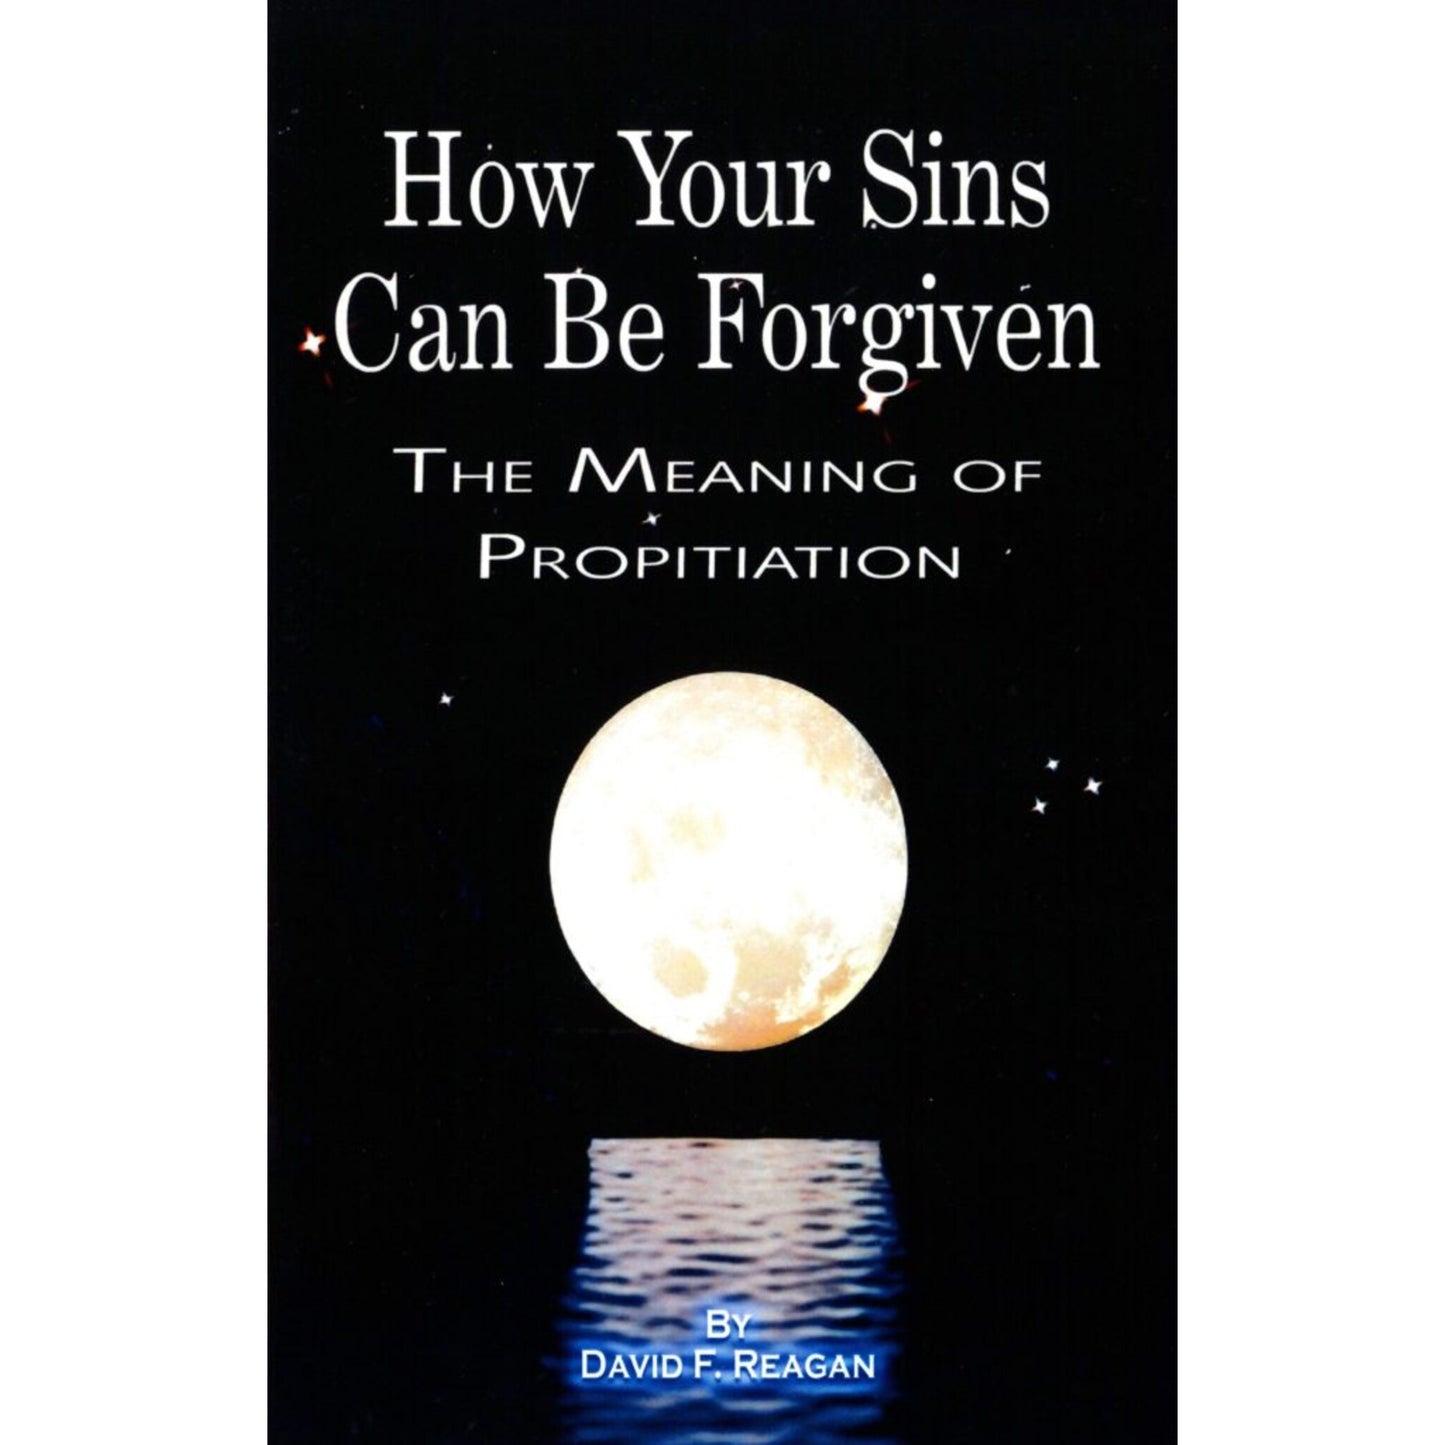 How Your Sins Can Be Forgiven